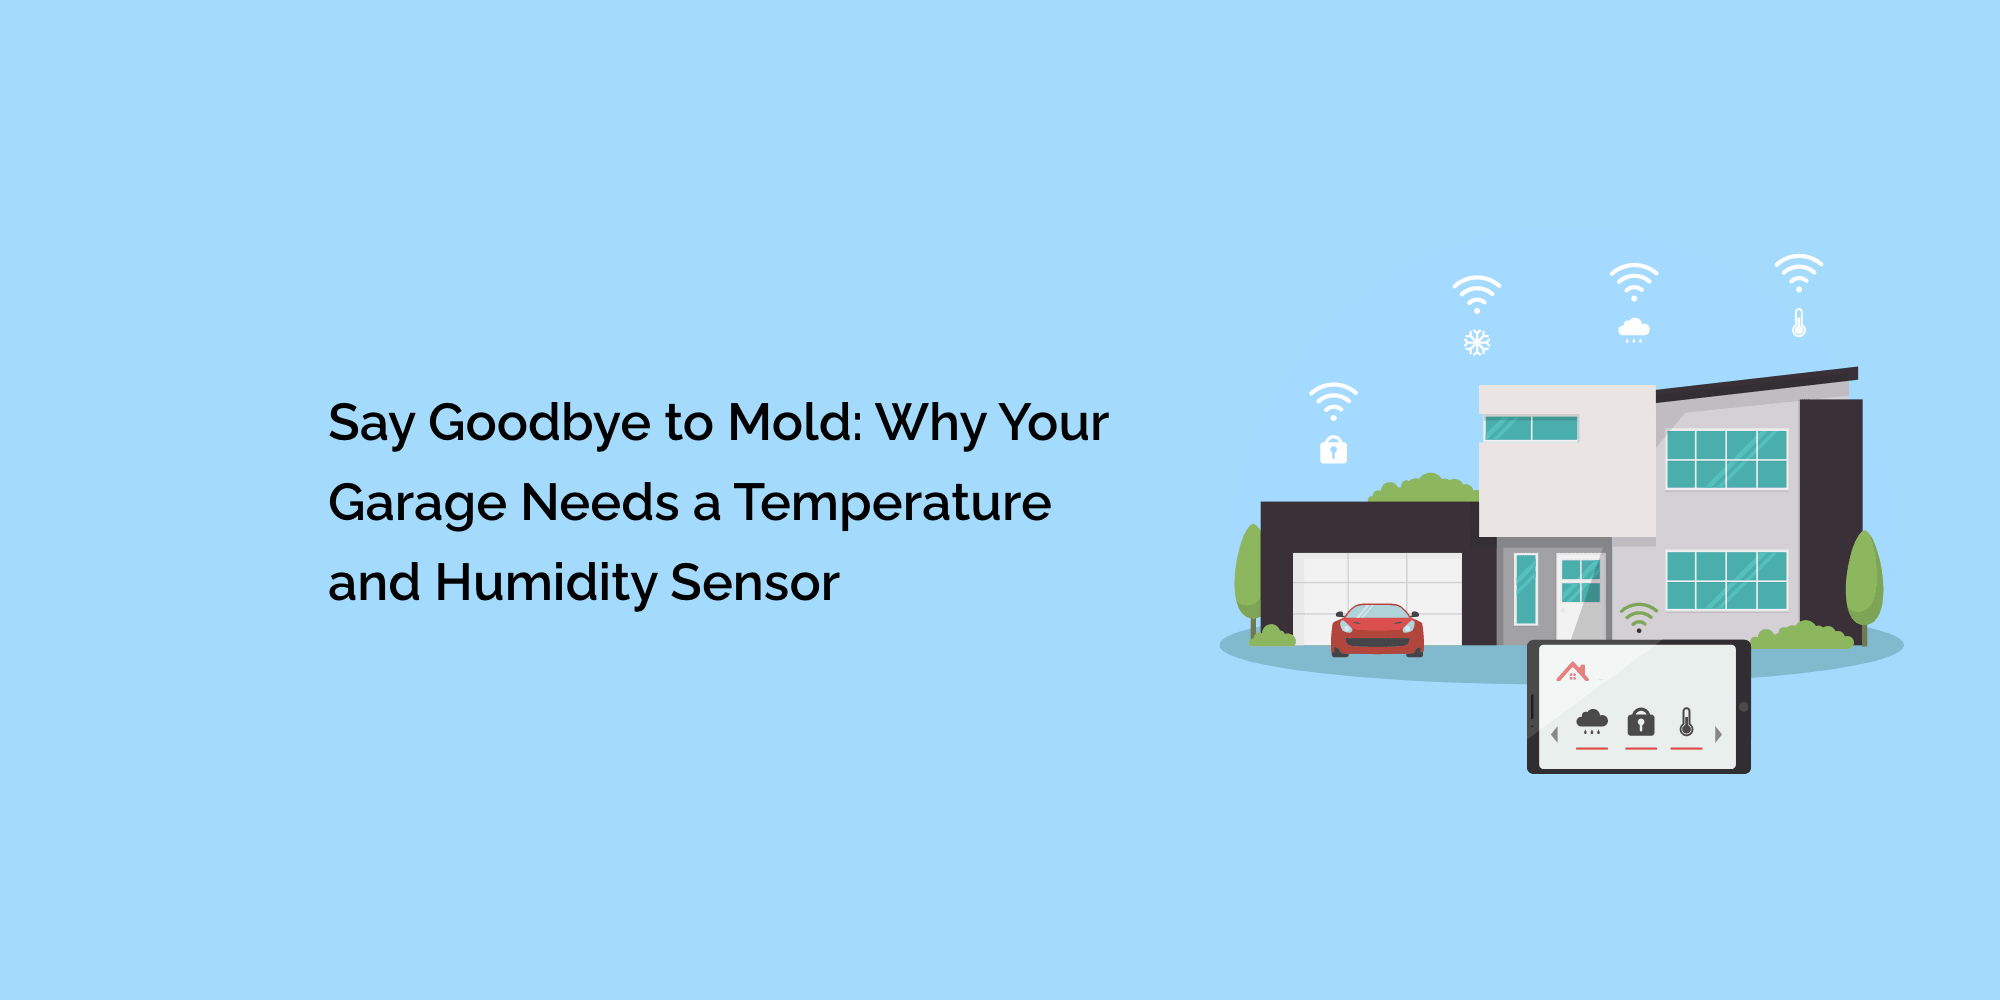 Say Goodbye to Mold: Why Your Garage Needs a Temperature and Humidity Sensor